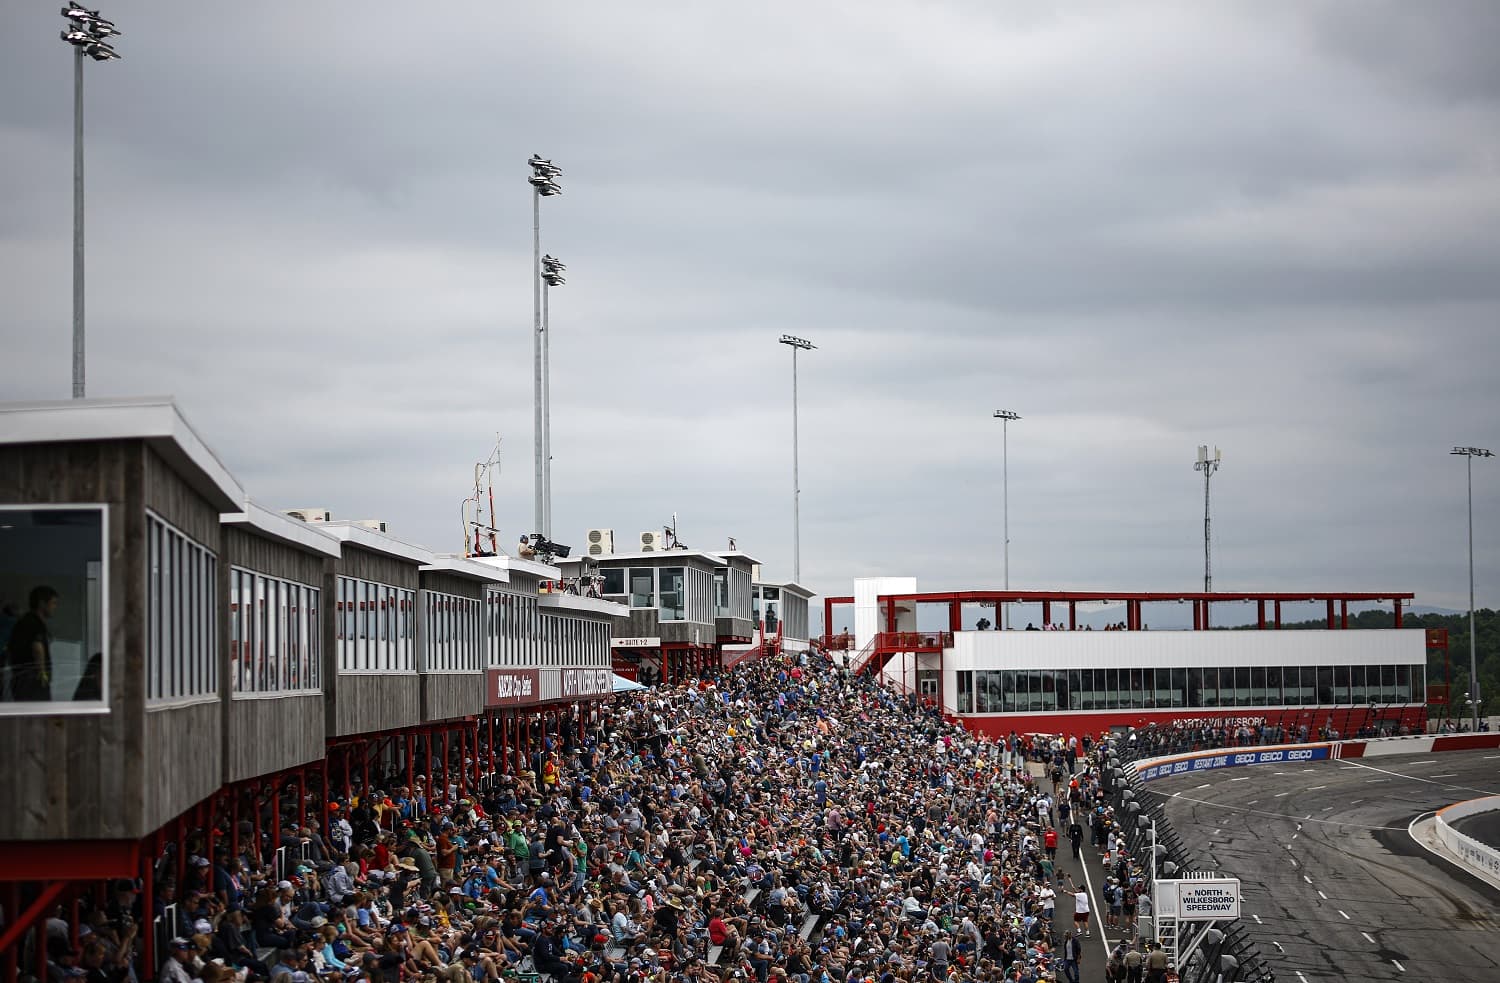 A general view of the grandstands during practice for the NASCAR Cup Series All-Star Race at North Wilkesboro Speedway on May 19, 2023. | Jared C. Tilton/Getty Images